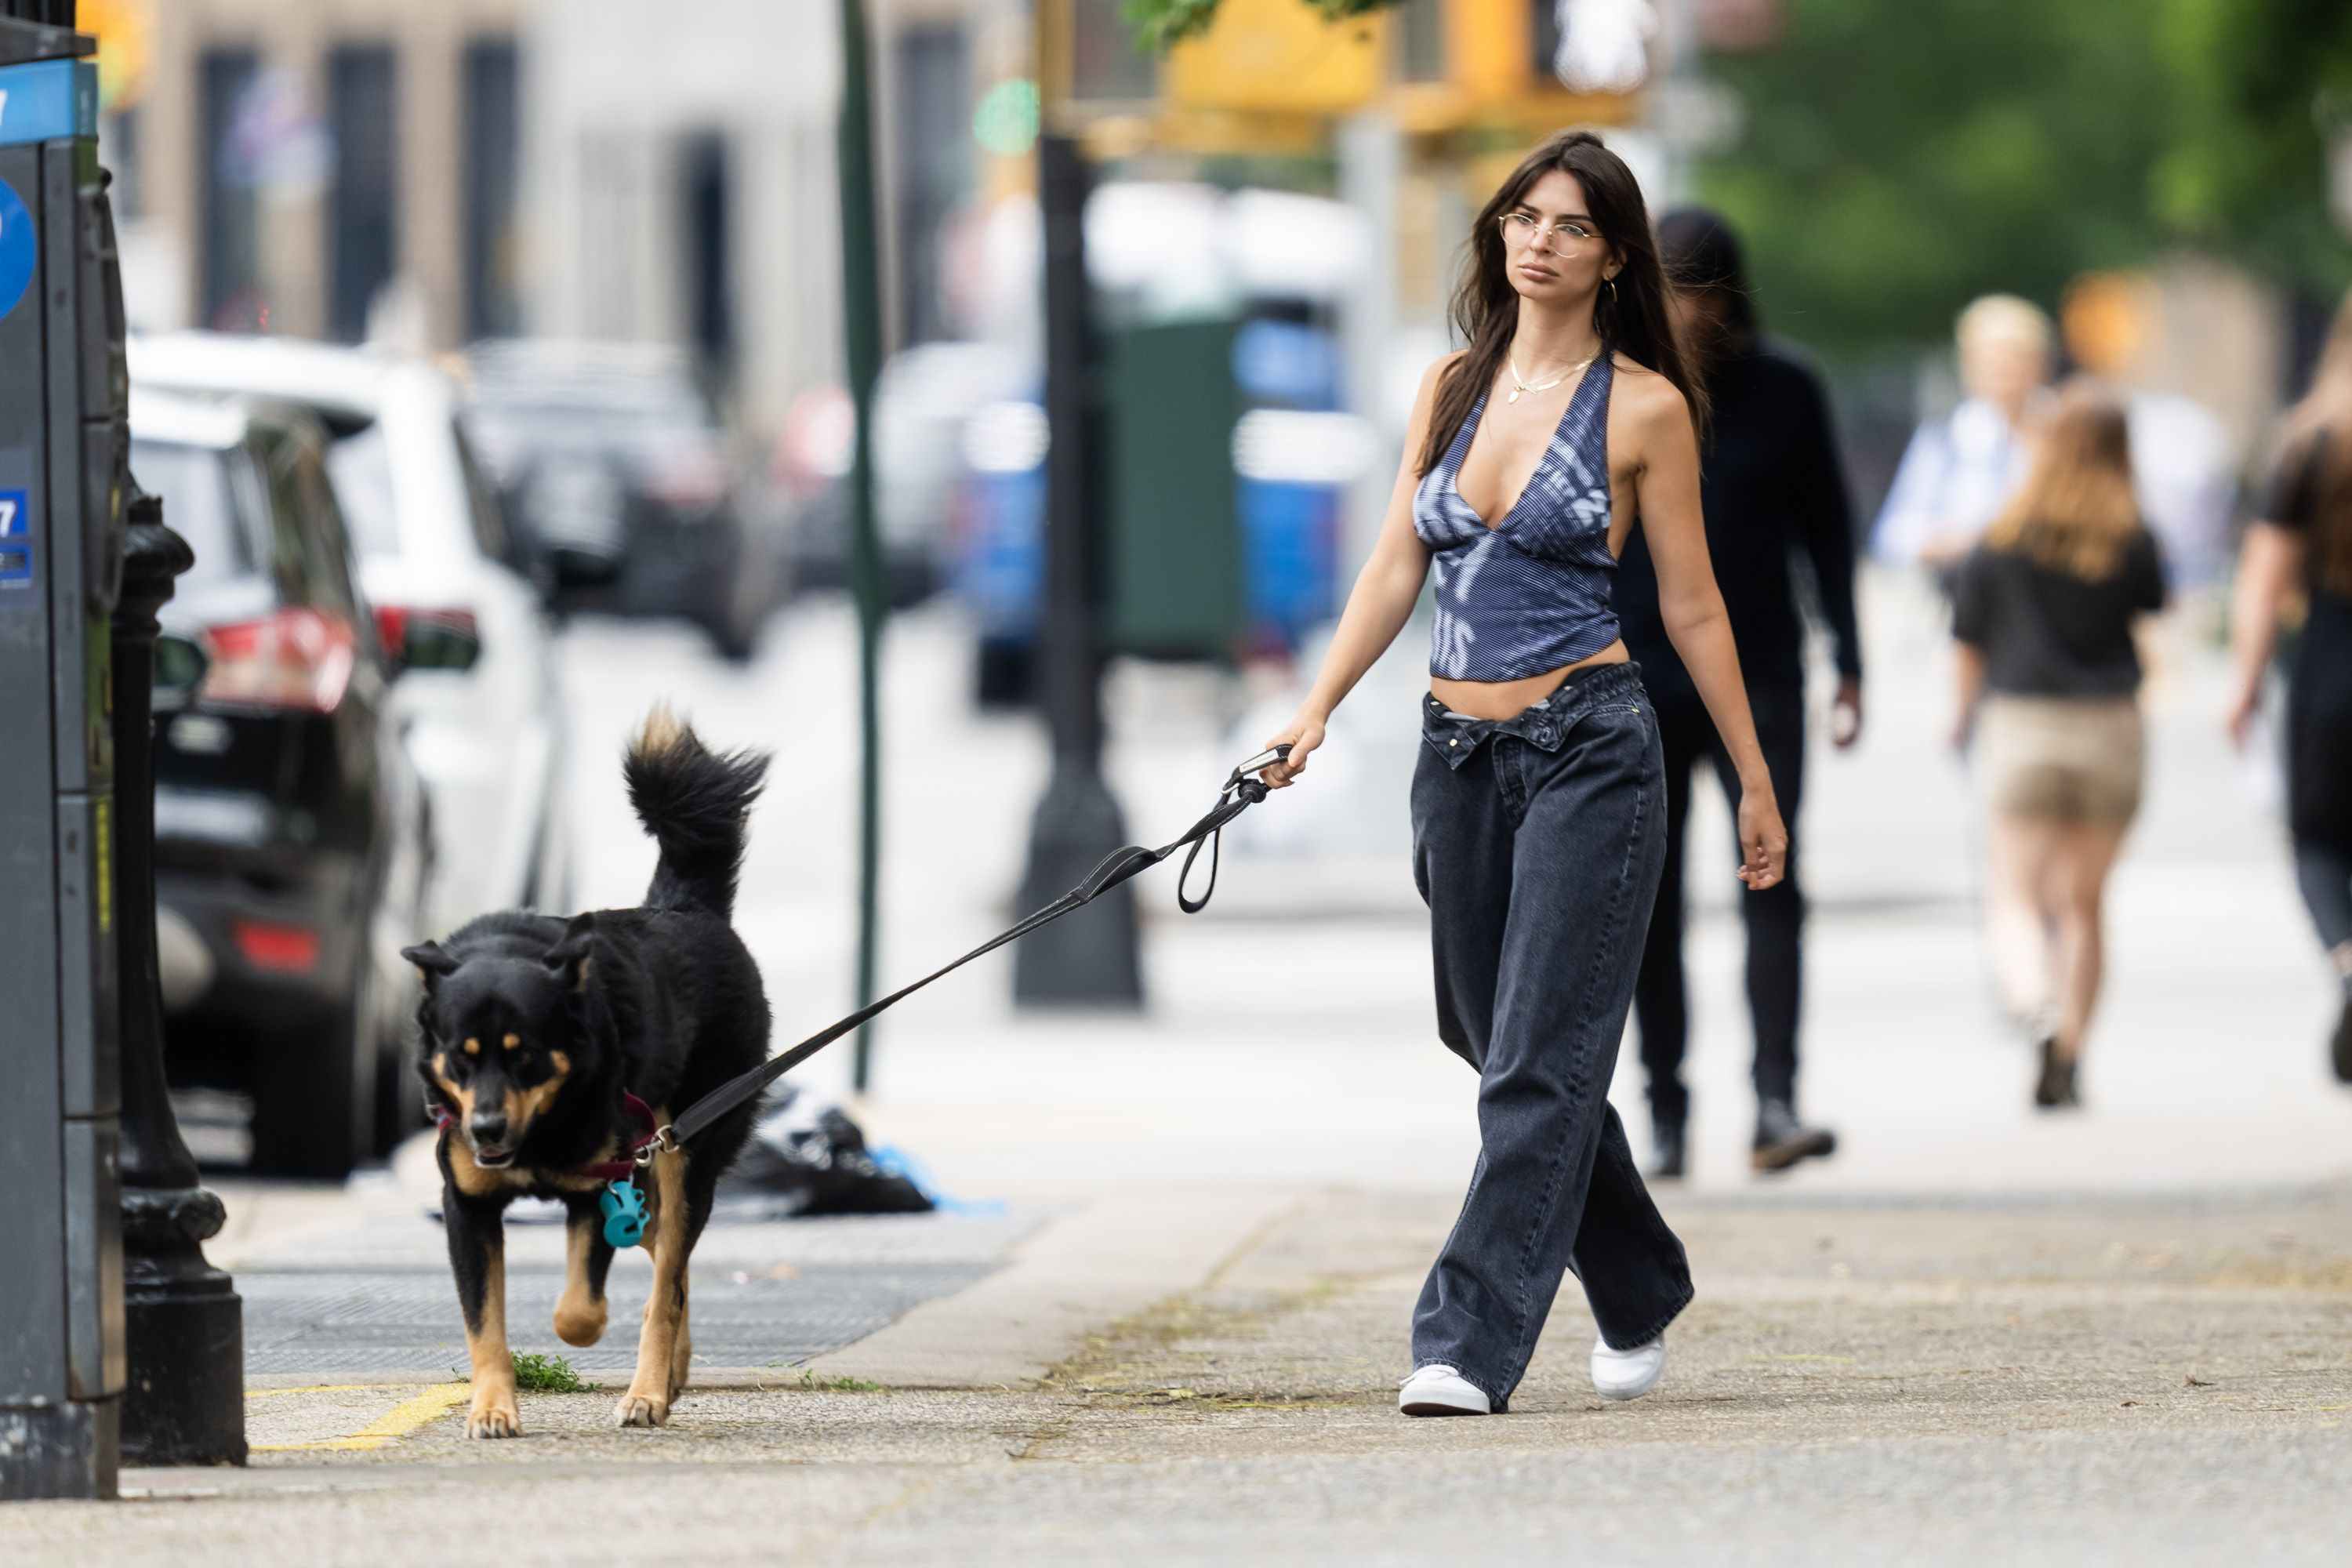 Emily Ratajkowski Goes Braless in a Low-Cut Top to Walk Her photo